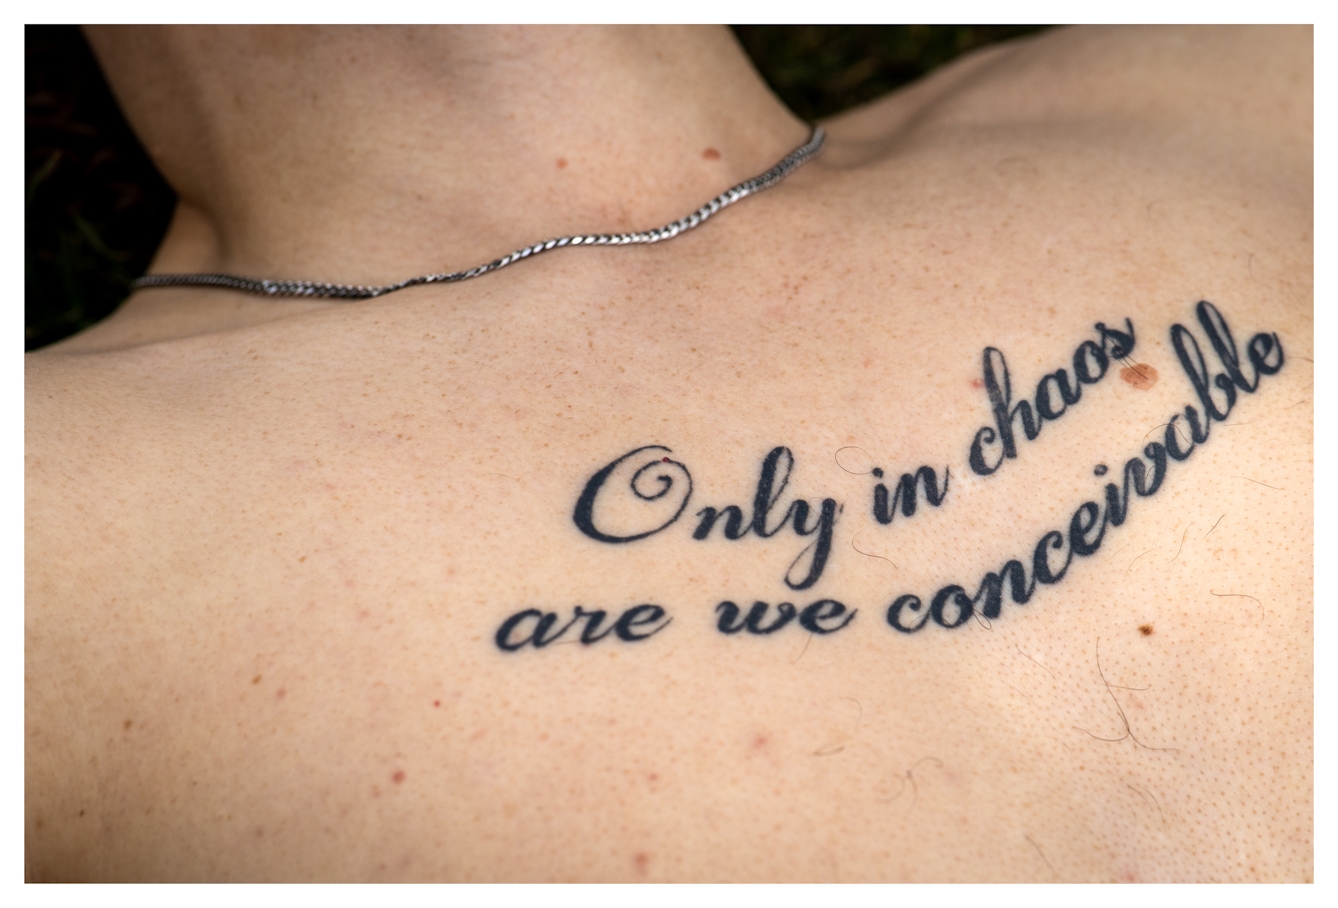 Photograph of the top section of a naked man's chest, from his sternum to his neck. Across his chest is a tattoo in ornate script with the words "Only in chaos are we conceivable". Around his neck is a simple silver chain necklace.